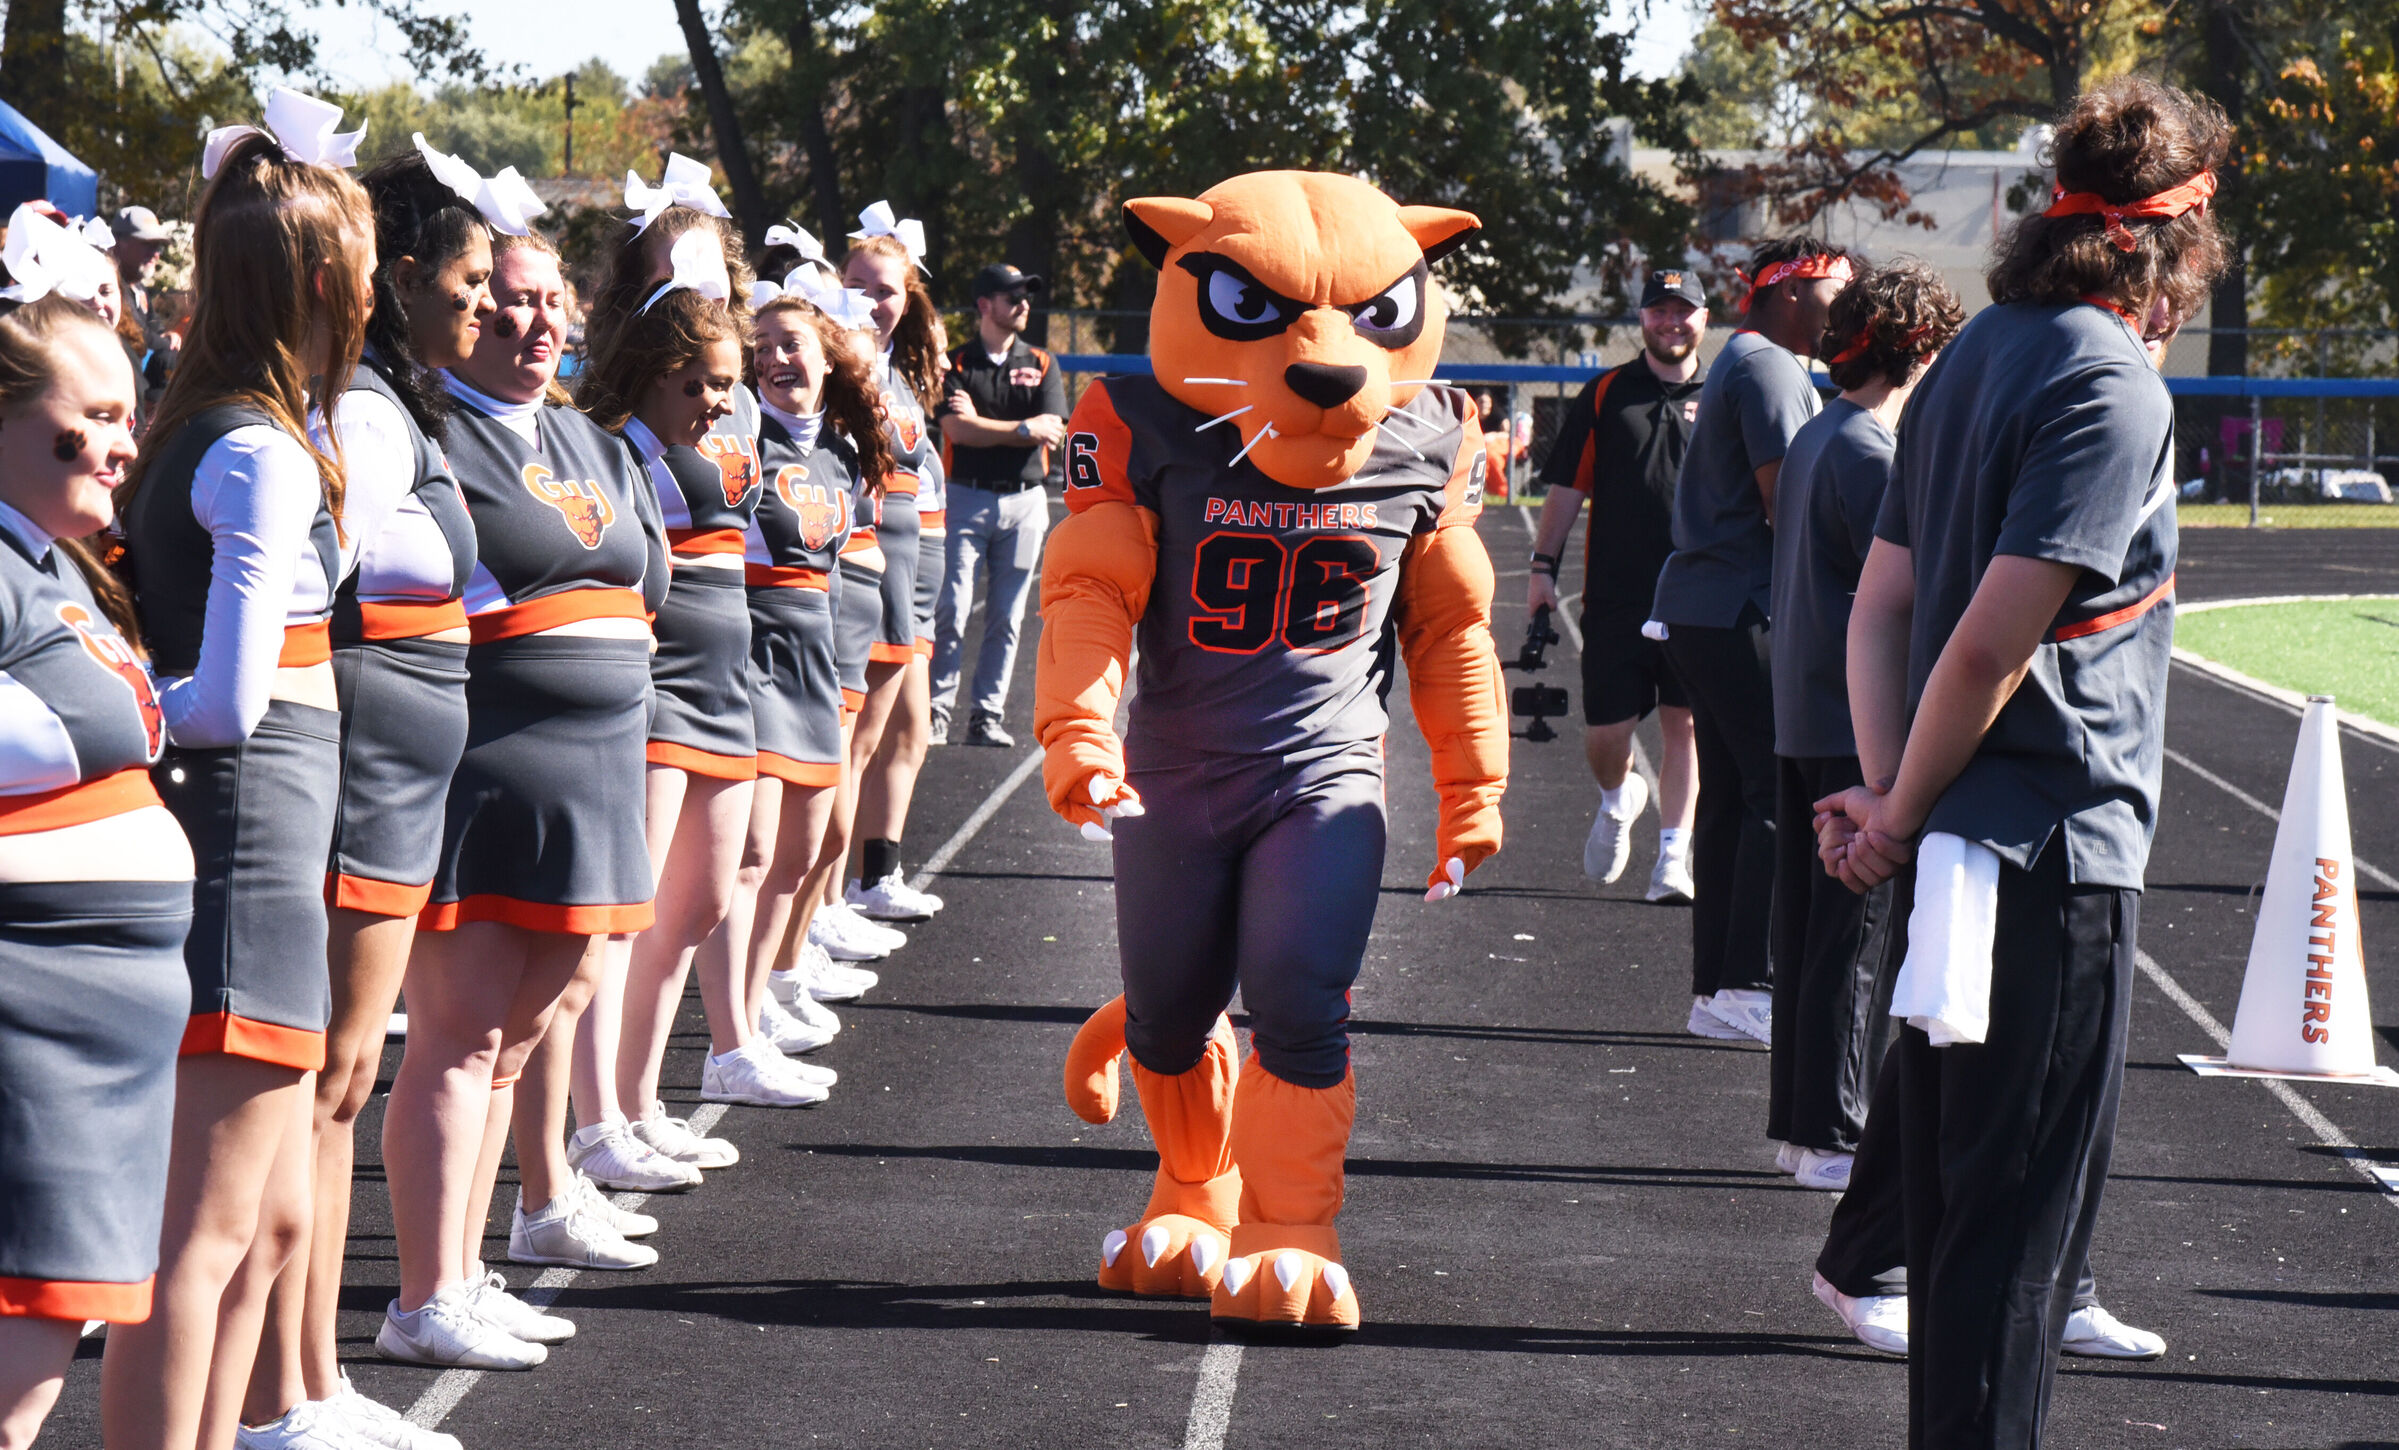 New Hoguey introduced at GU's homecoming celebration